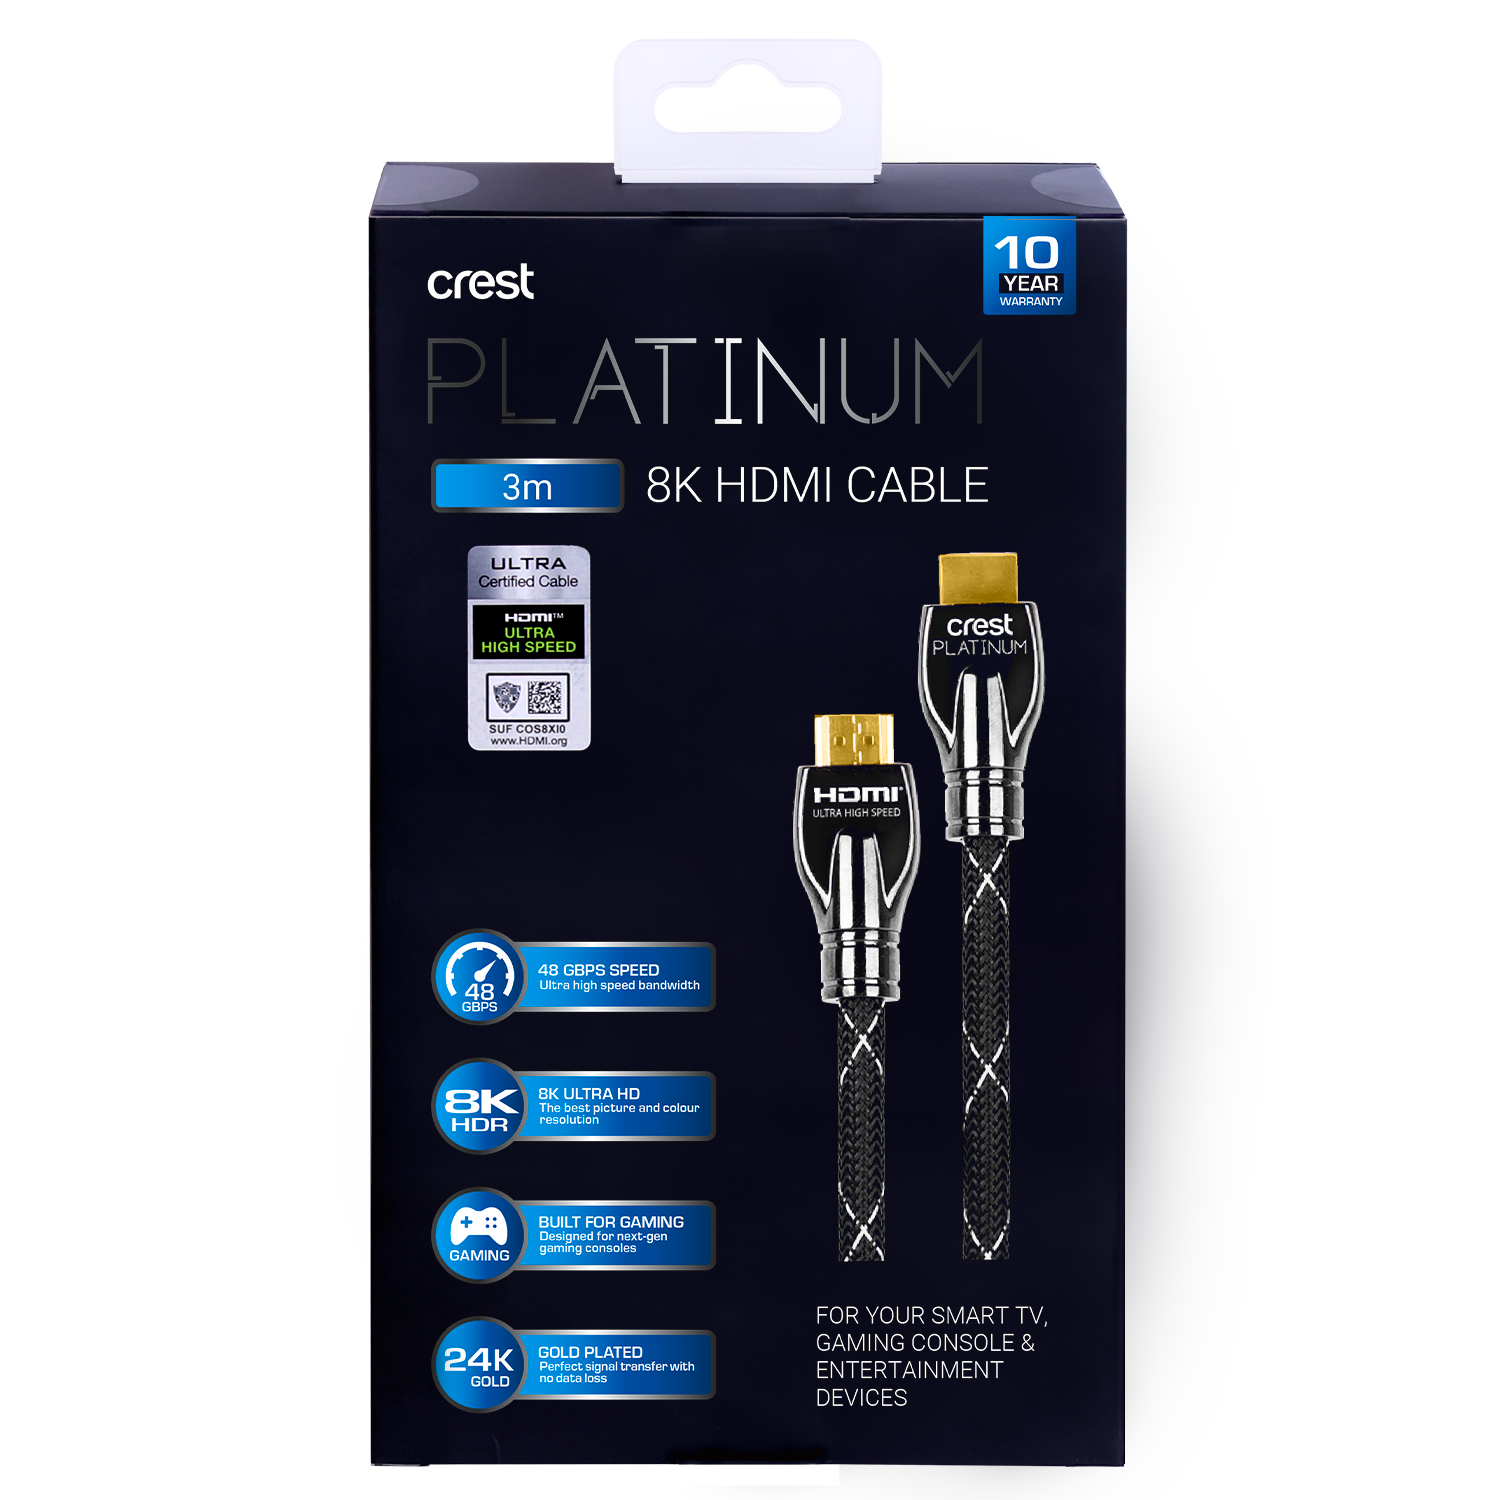 Platinum 8K HDMI Cable With Ethernet 48Gbps 3M